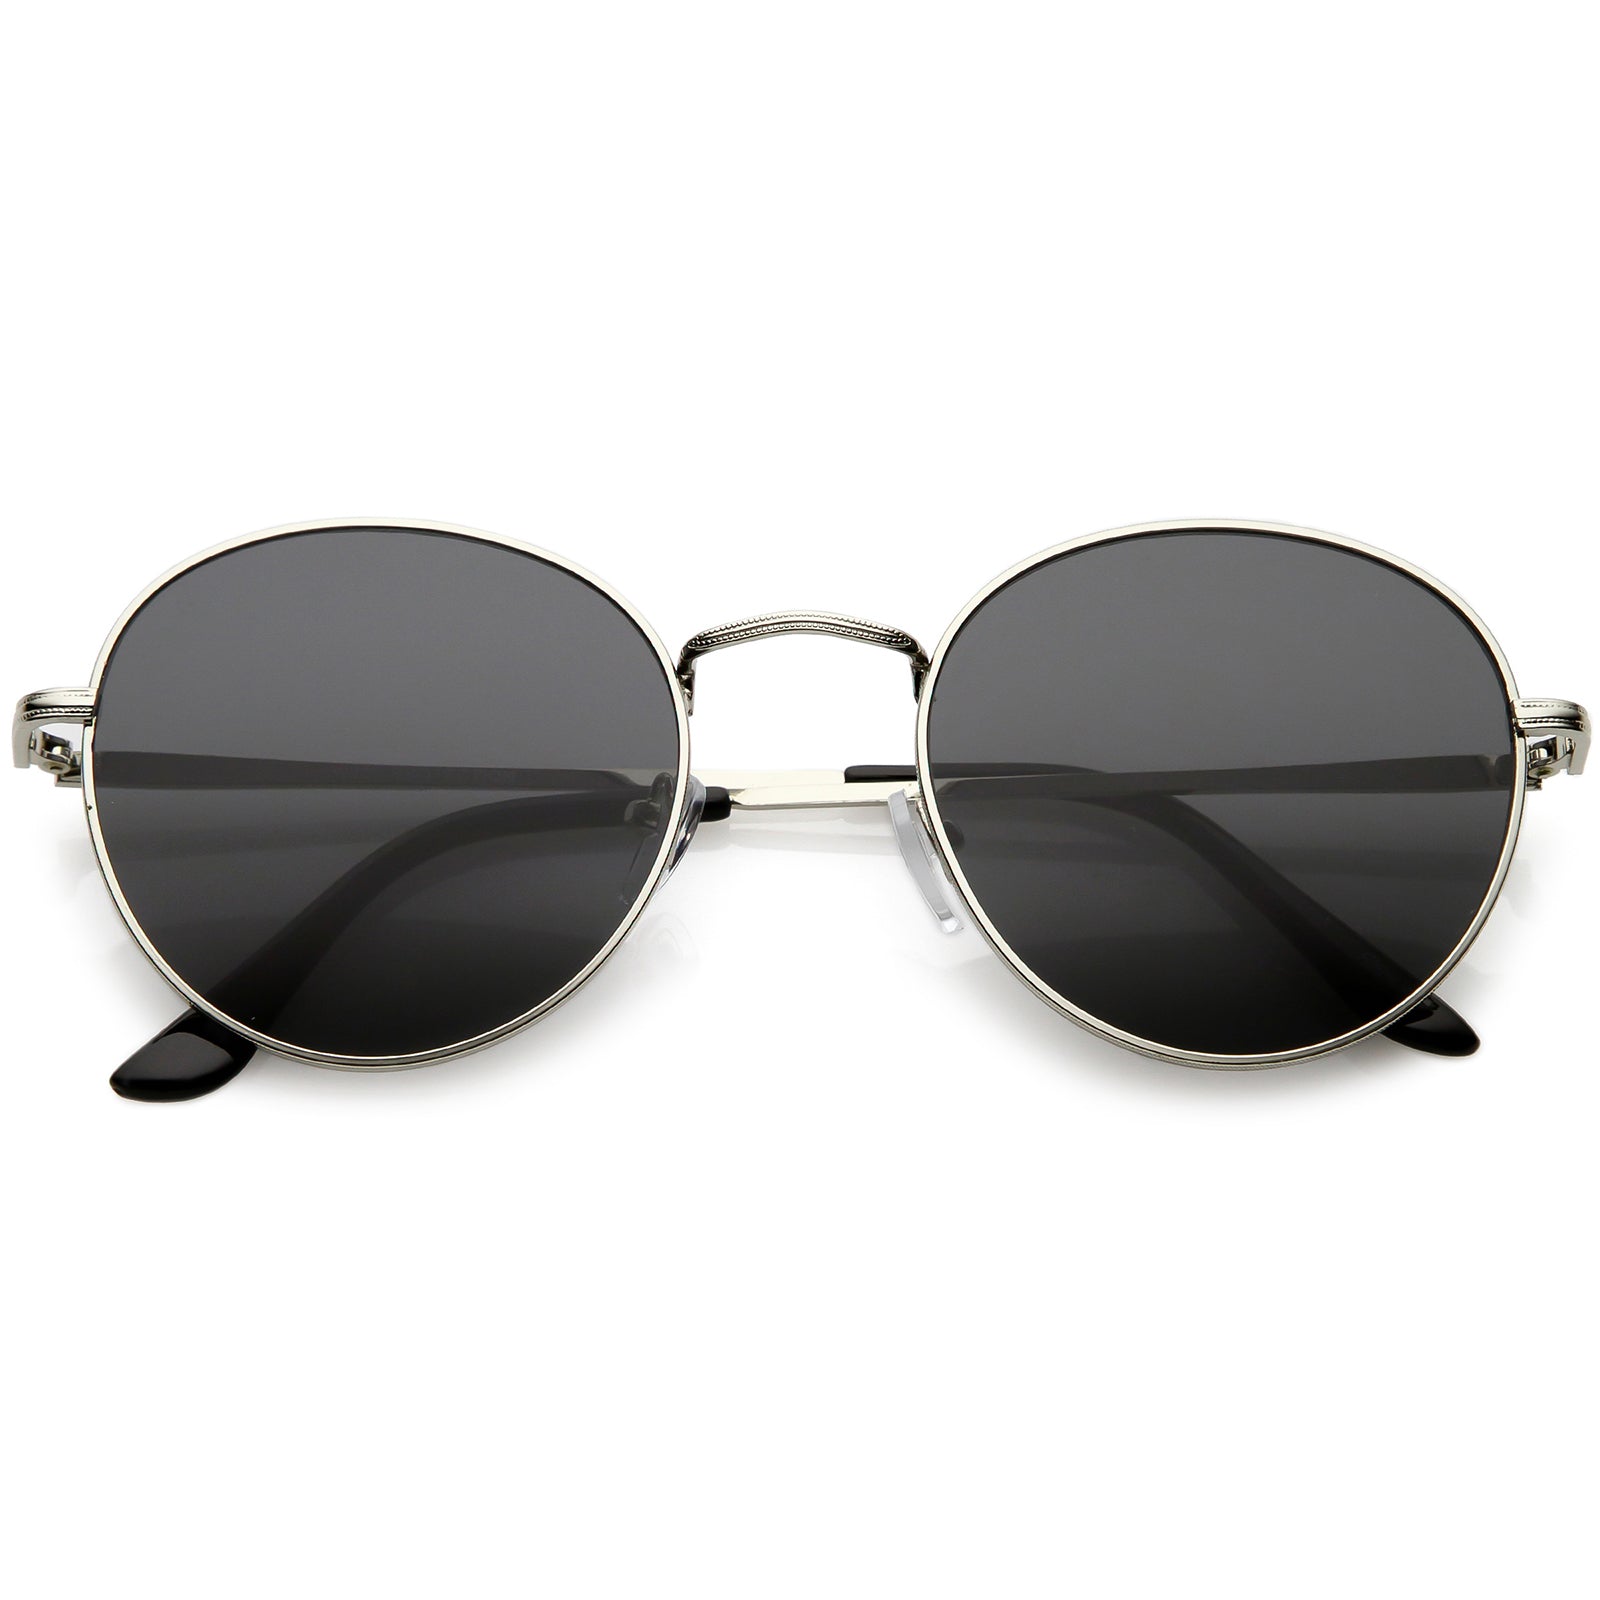 Classic Metal Round Sunglasses With Neutral Color Flat Lens 54mm ...